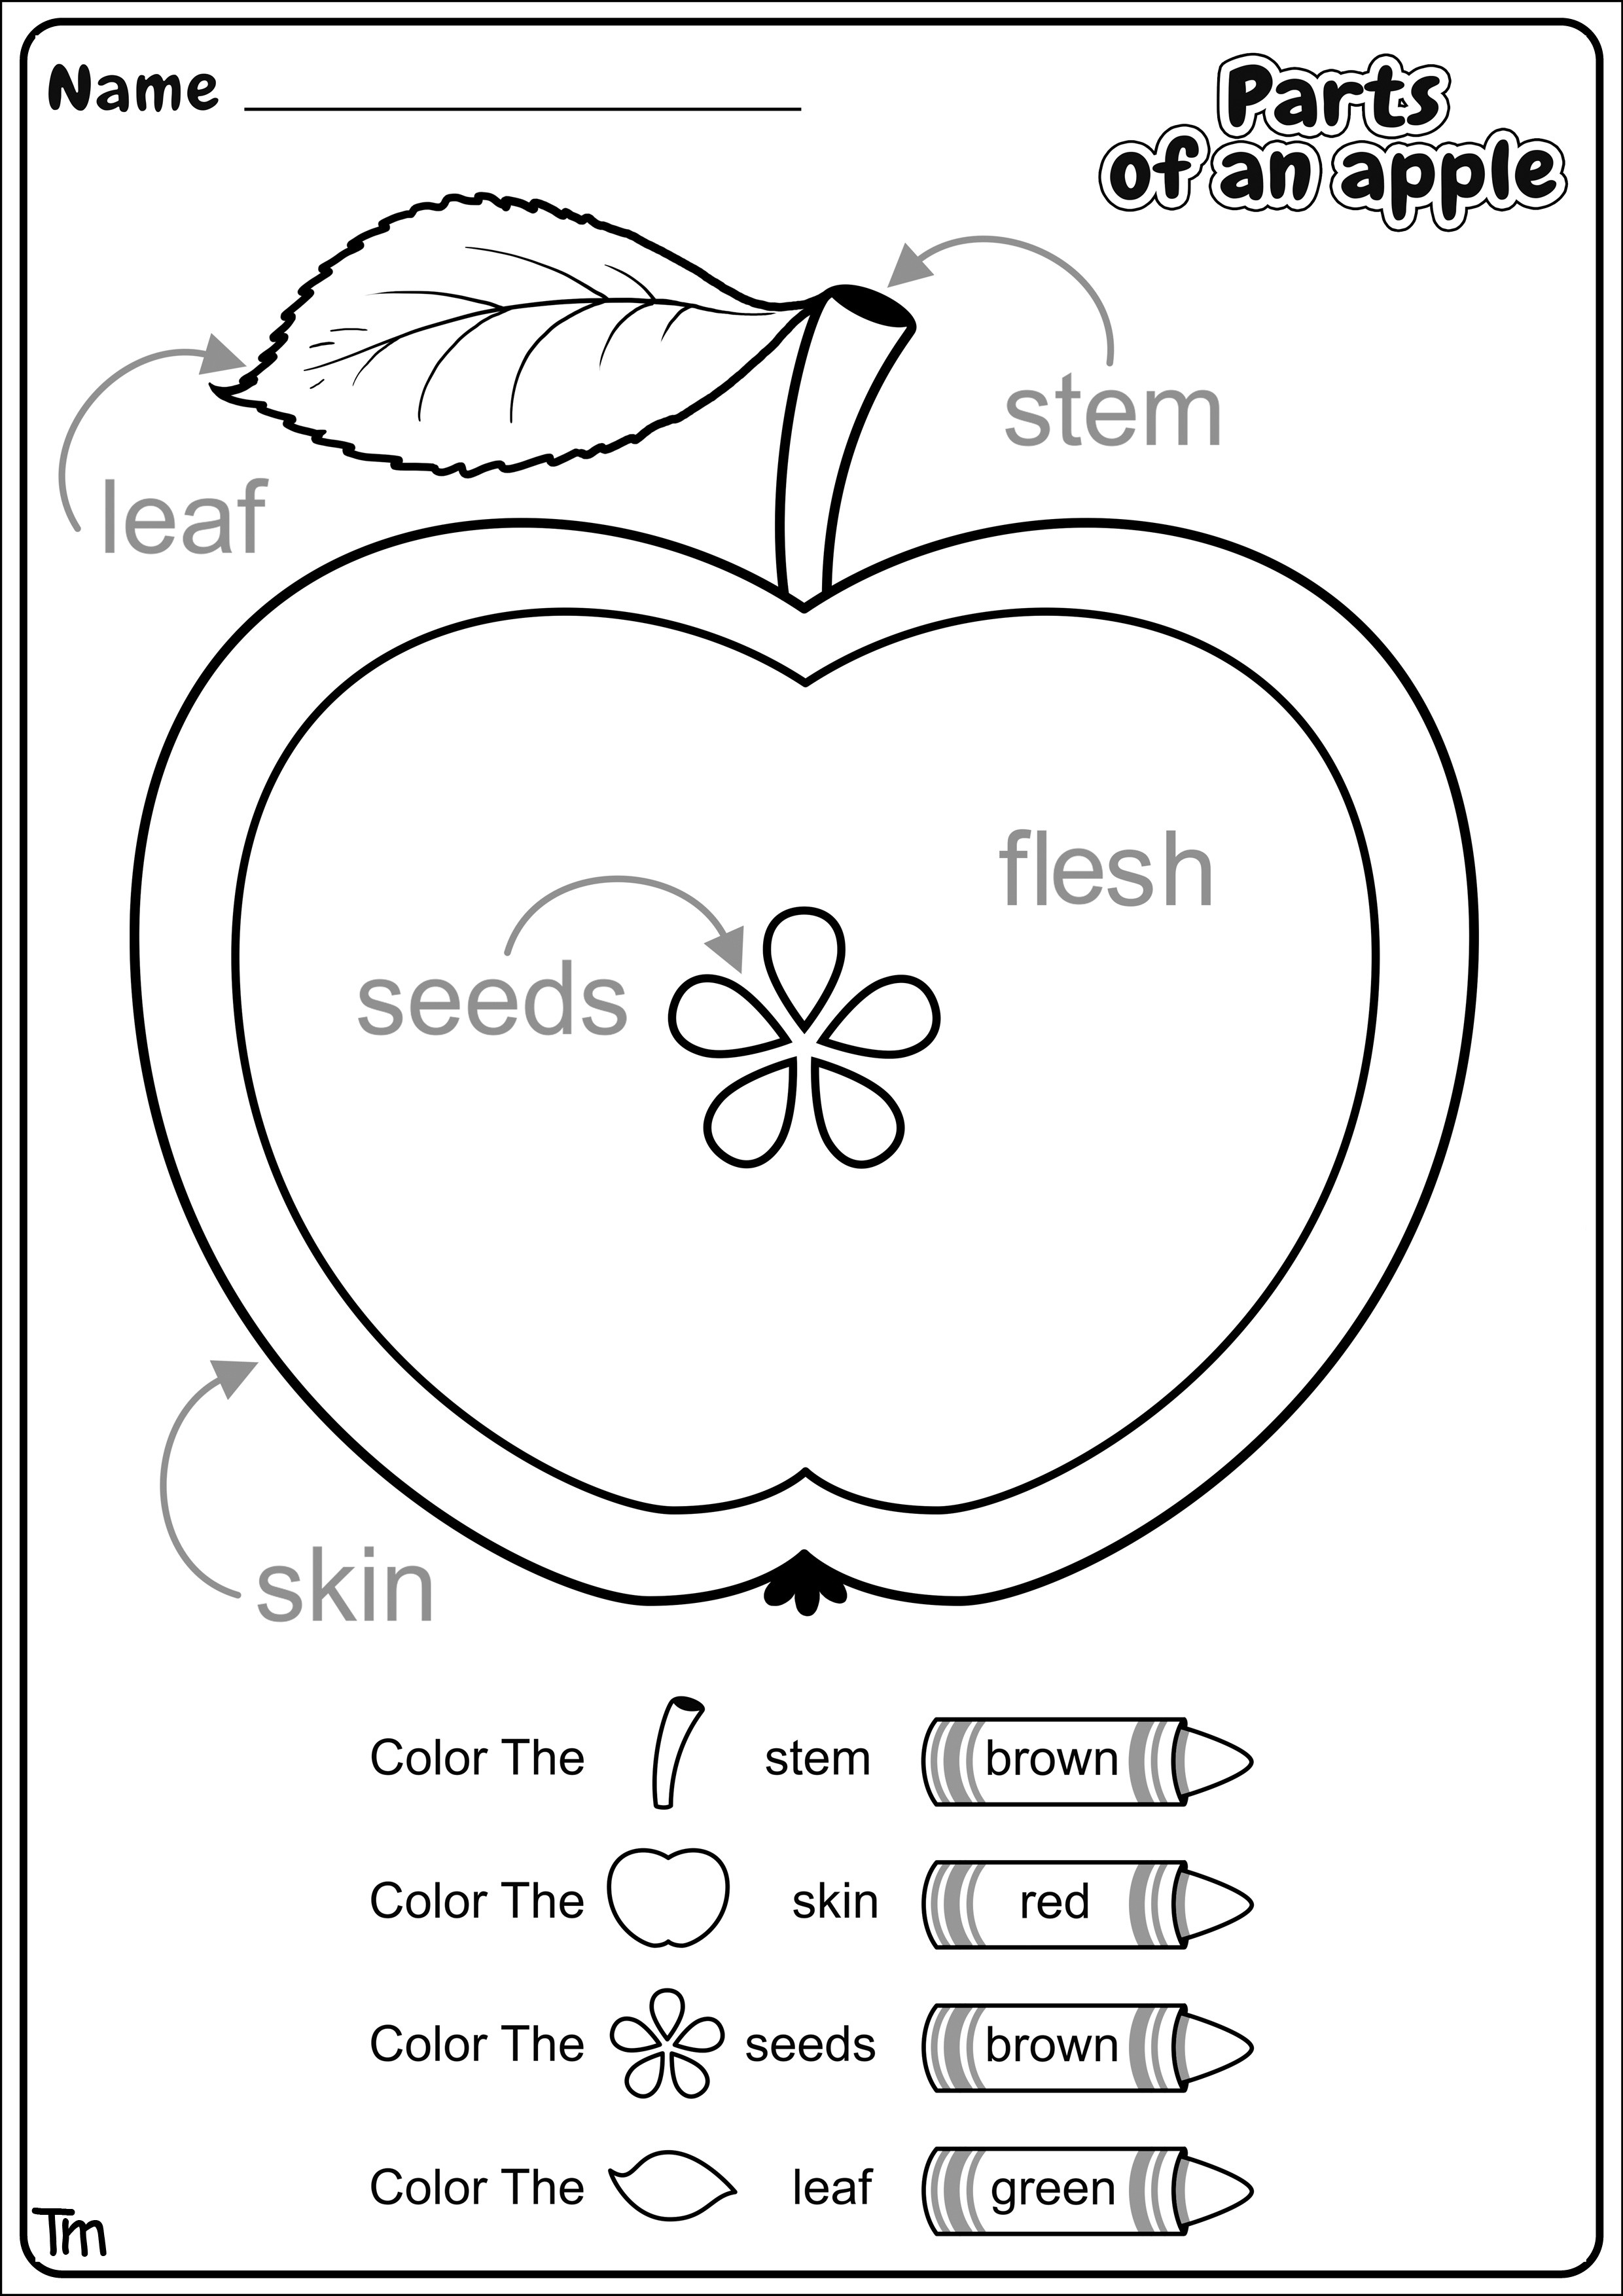 Free Printable Apple Worksheets Apples &amp; where they E From Preschool theme Worksheets